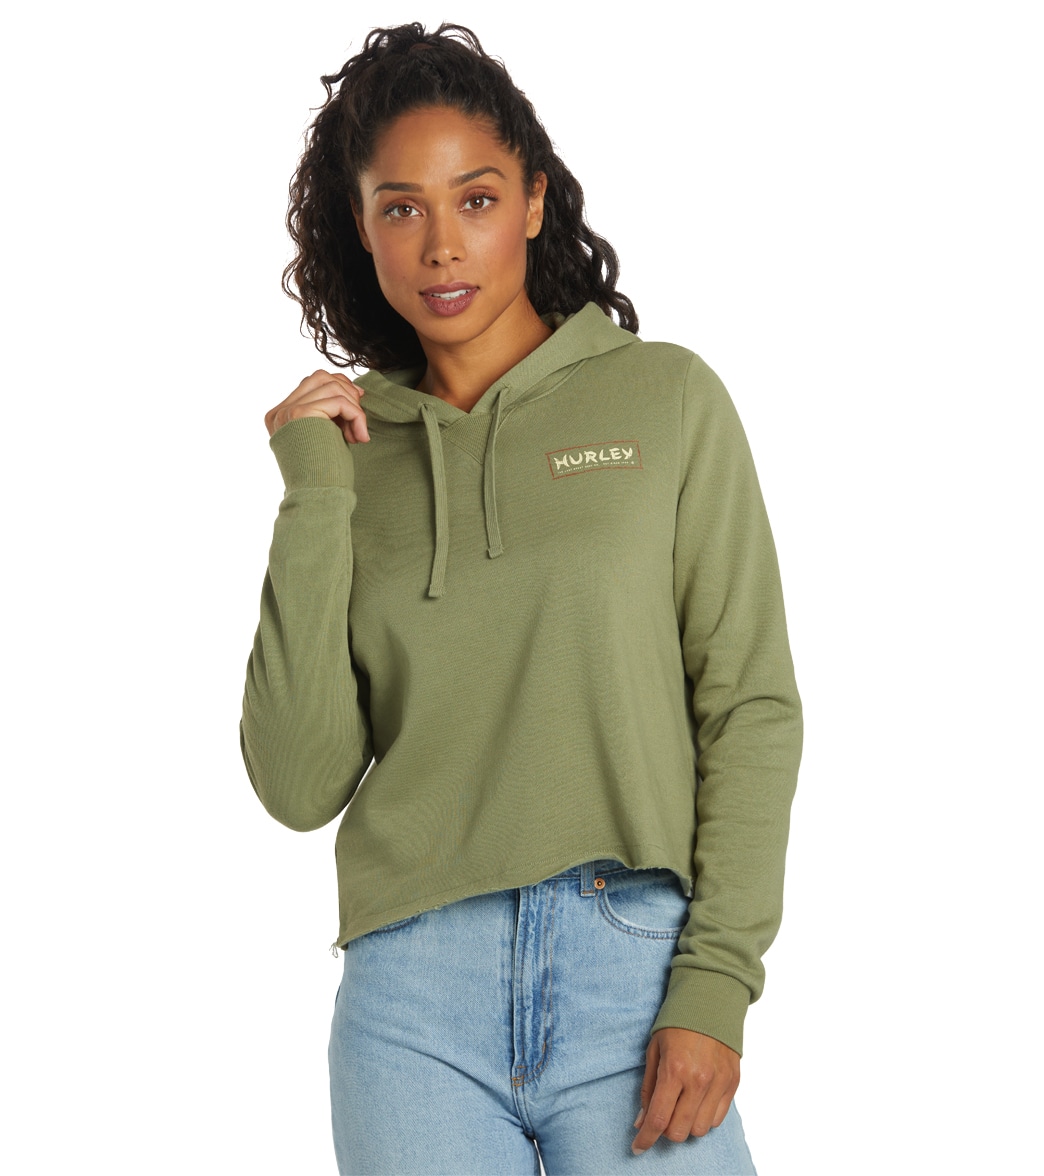 Hurley Women's Death In Paradise Cut Off Pullover Hoodie - Oil Green Large Cotton/Polyester - Swimoutlet.com